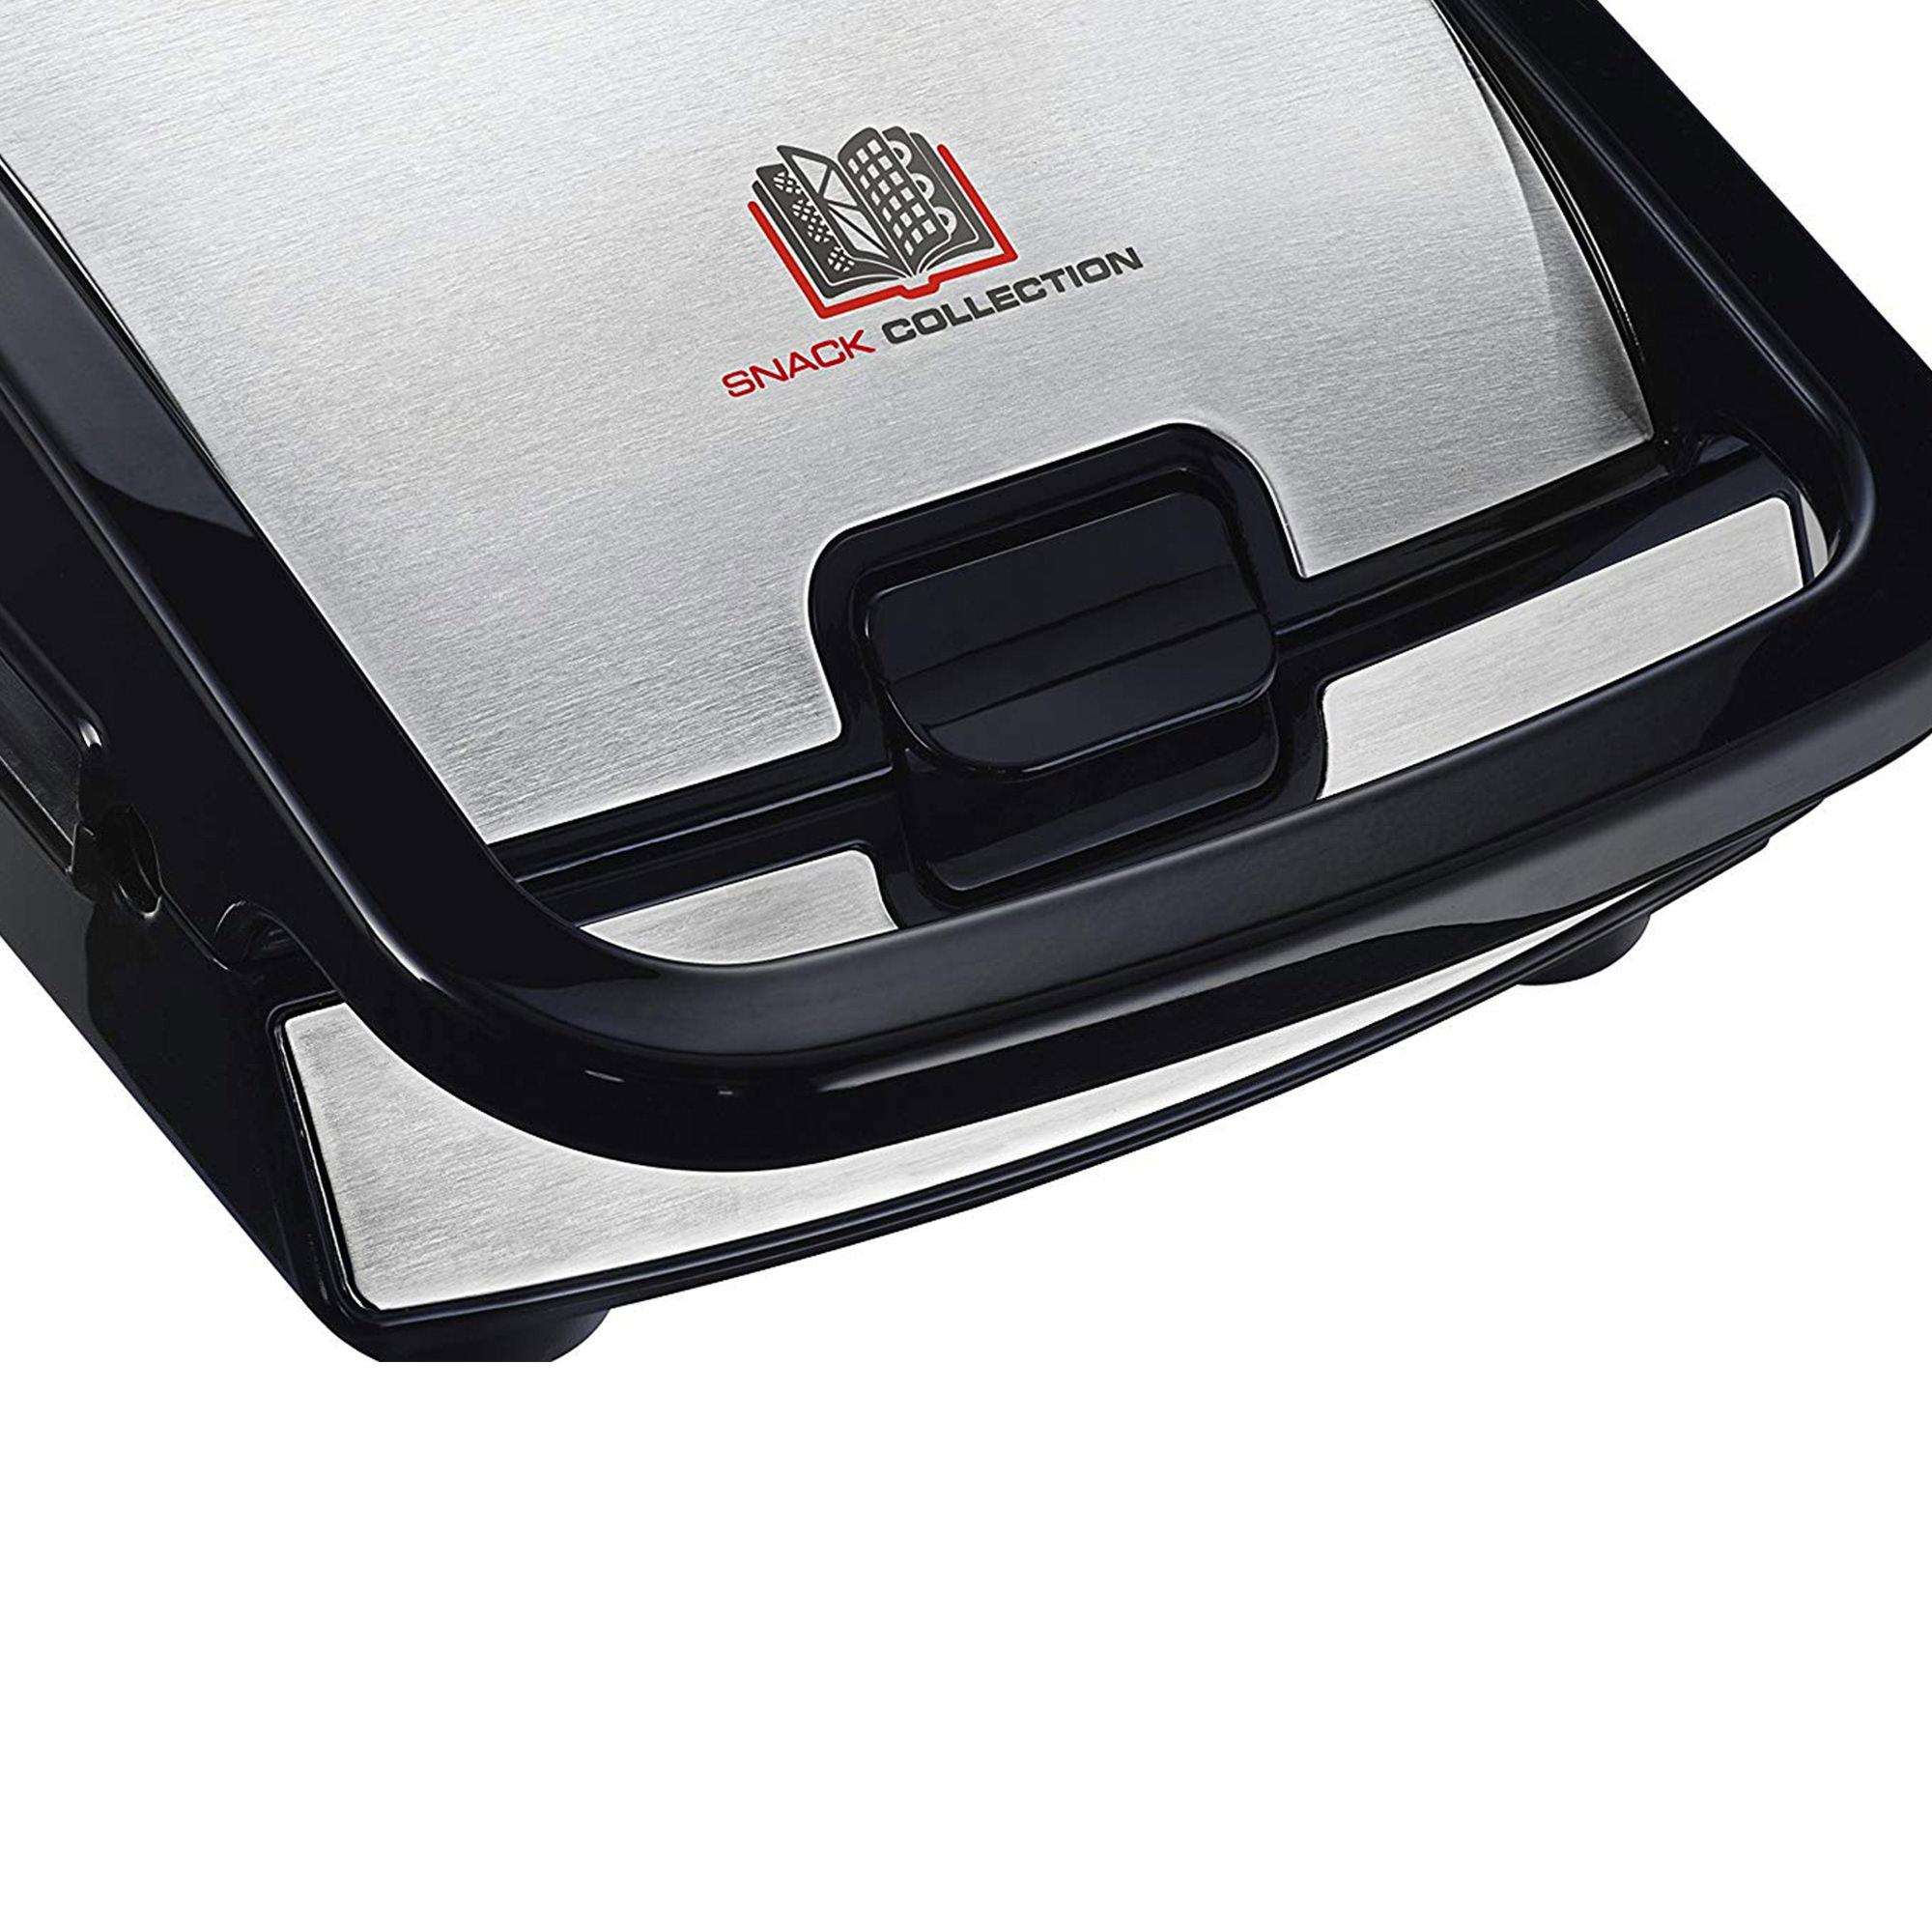 Tefal Snack Collection SW852D Multi-Function Sandwich Press Image 3